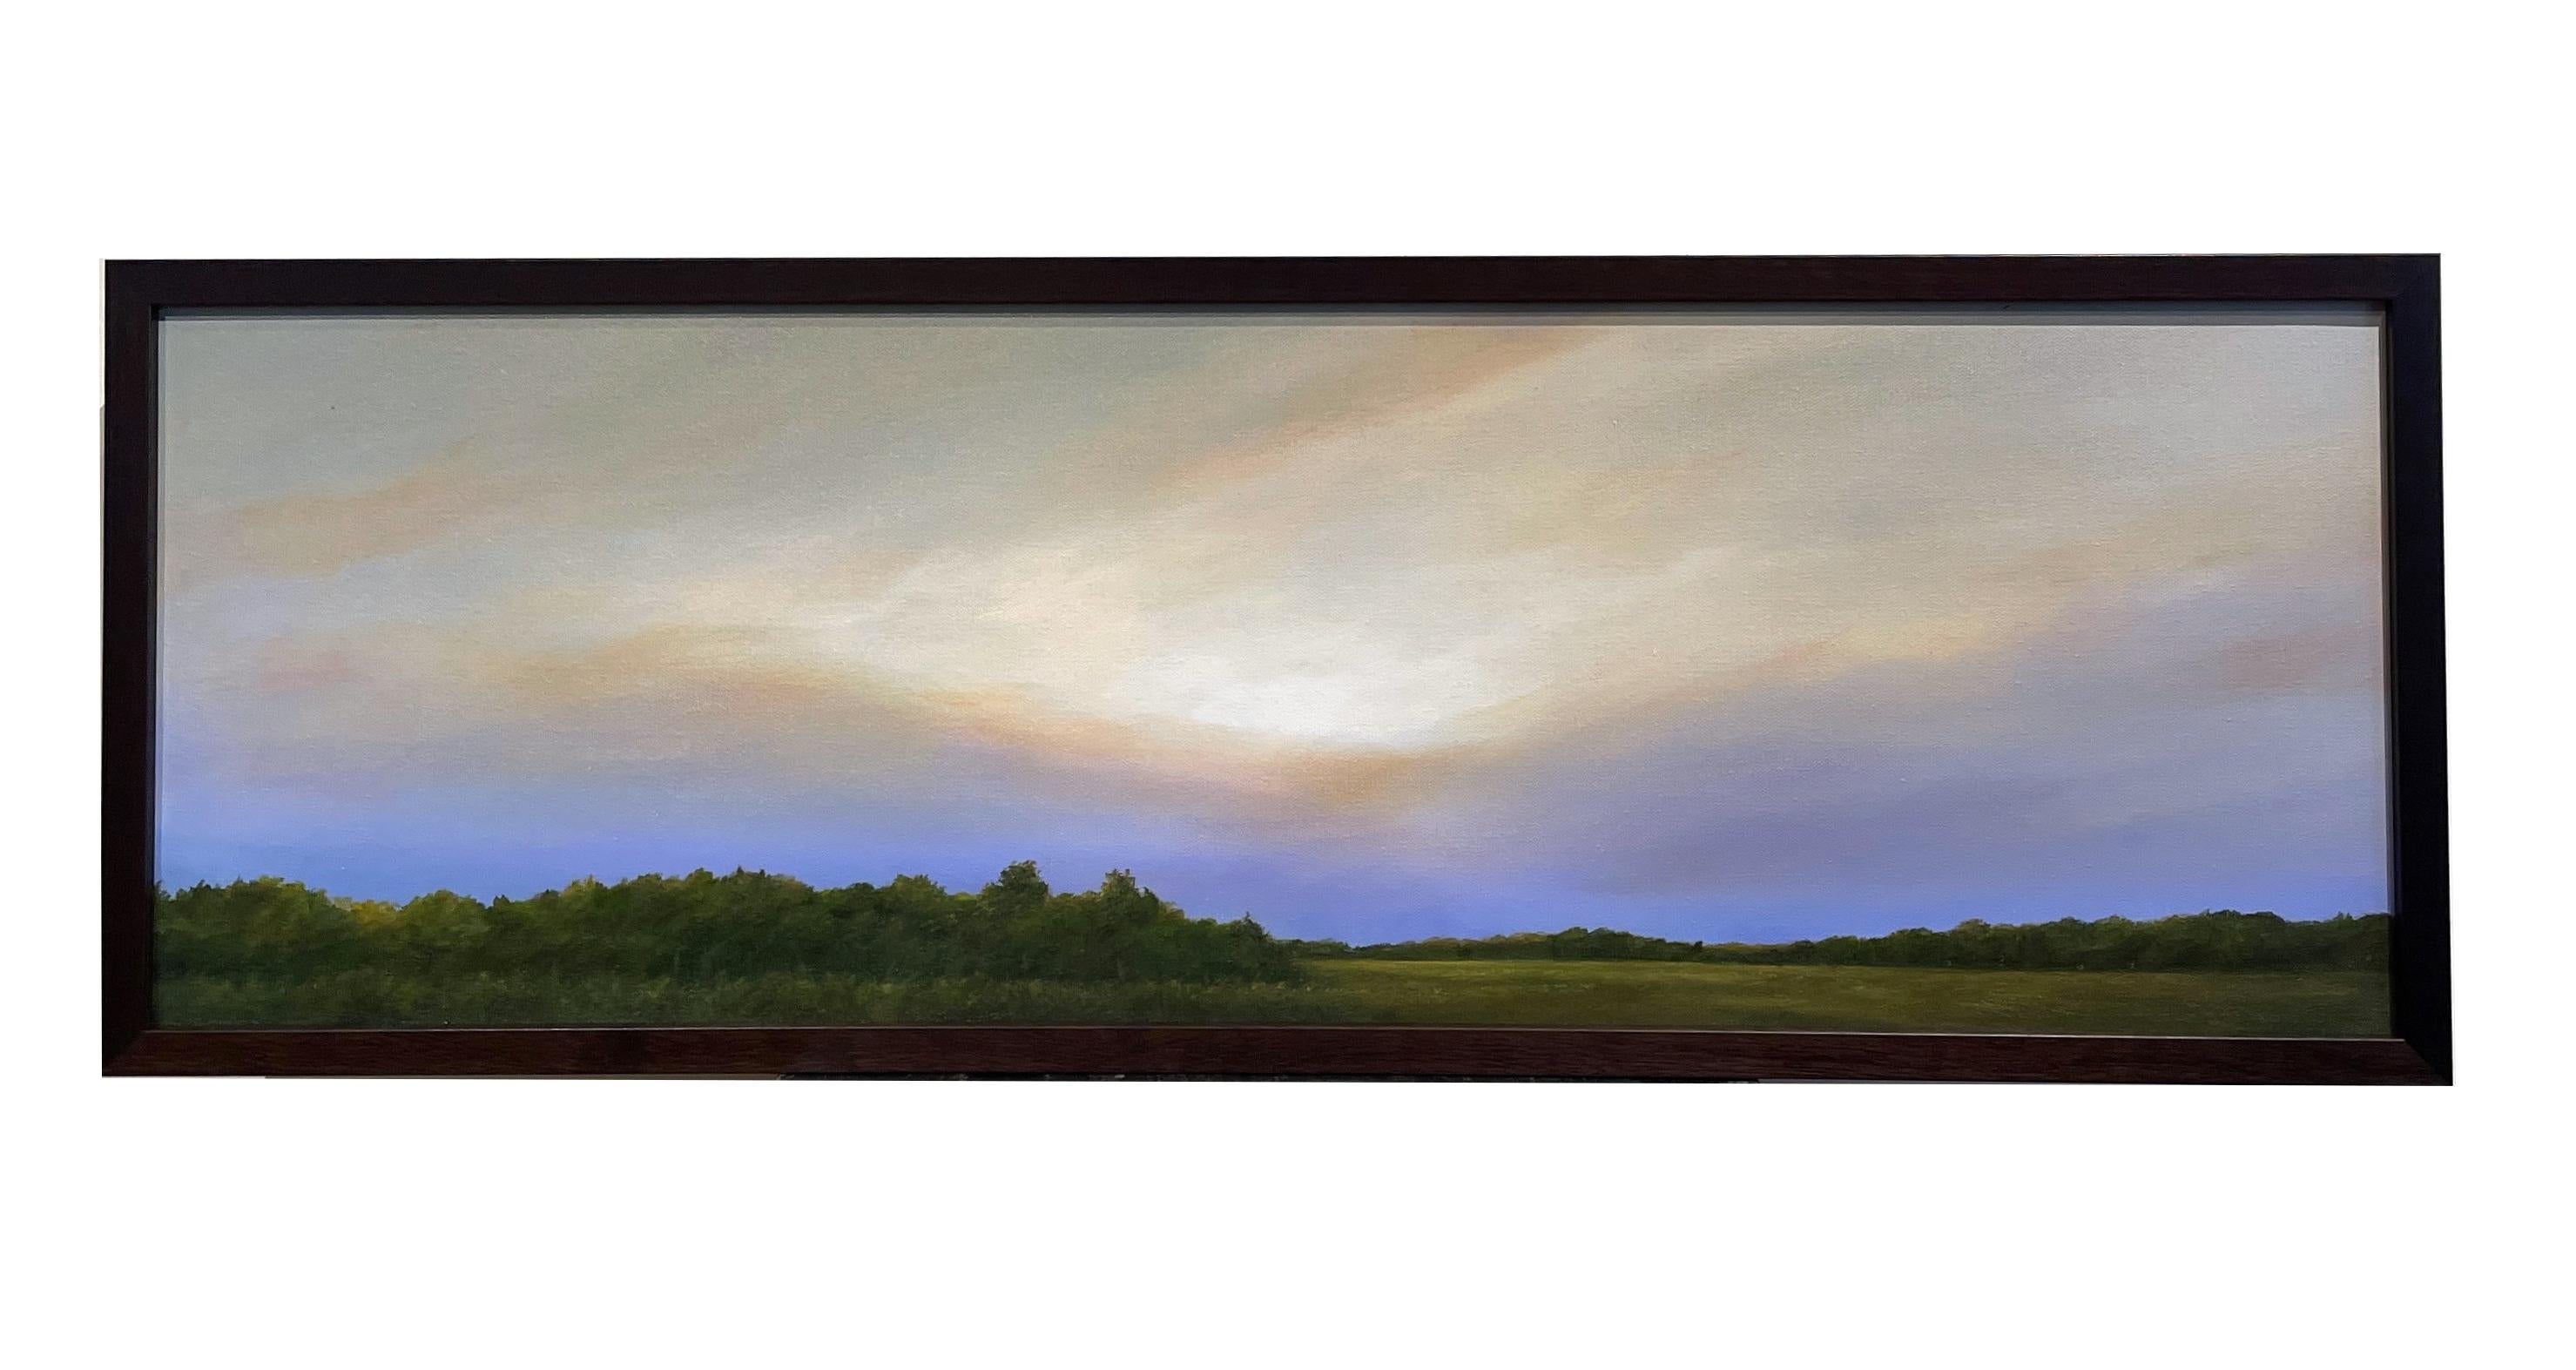 Field North of Chatham - Serene Landscape with Vast Cloudy Sky, Framed - Painting by Ahzad Bogosian